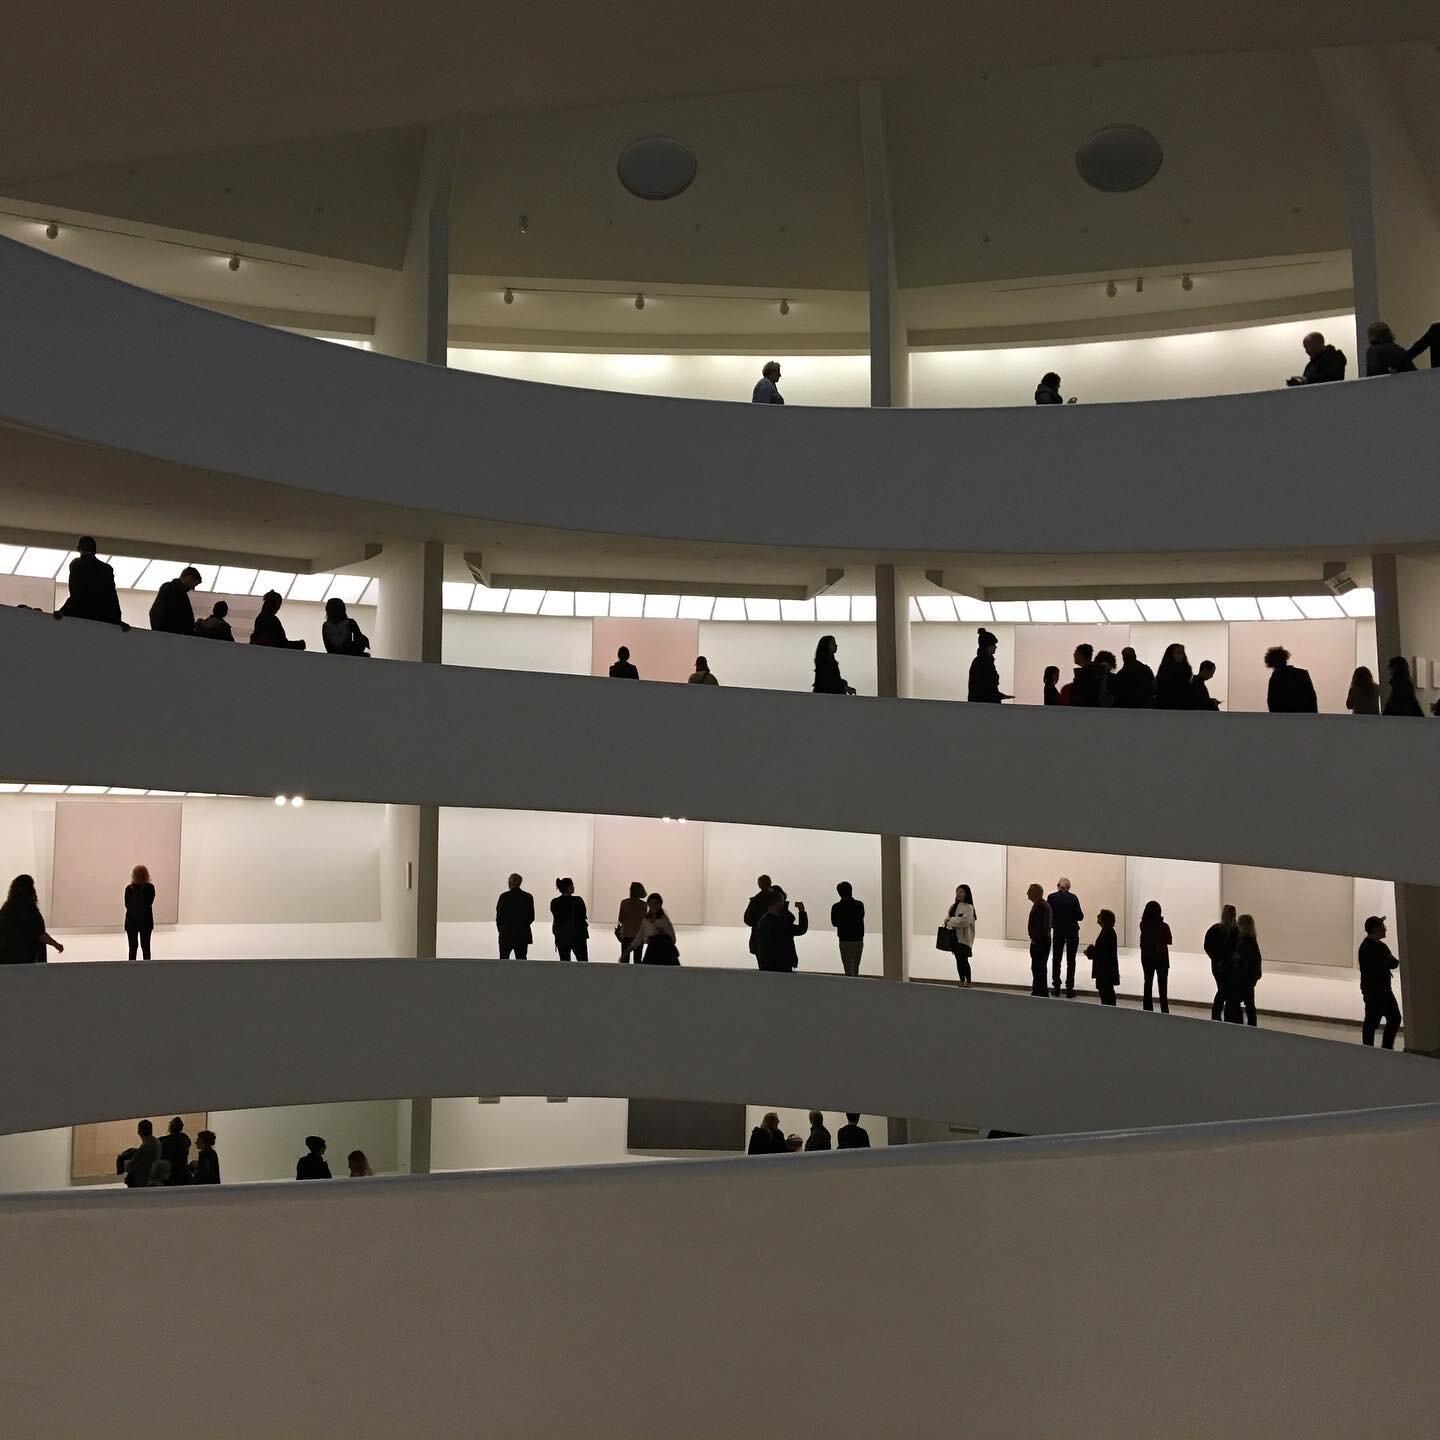 A favorite New York experience: Watching people milling about across the Guggenheim rotunda.